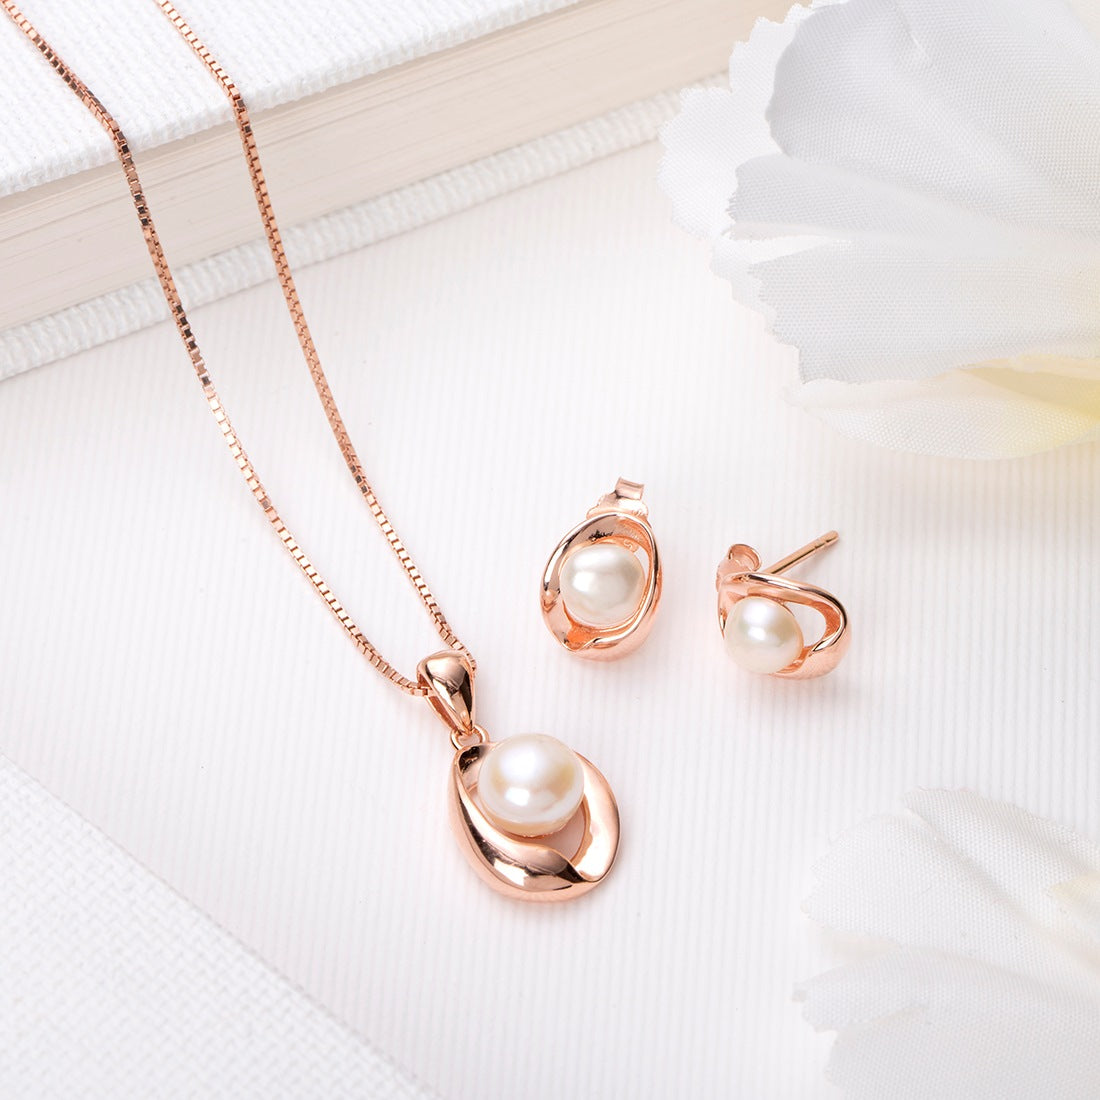 Pearlescent Romance Rose Gold-Plated 925 Sterling Silver Jewelry Set